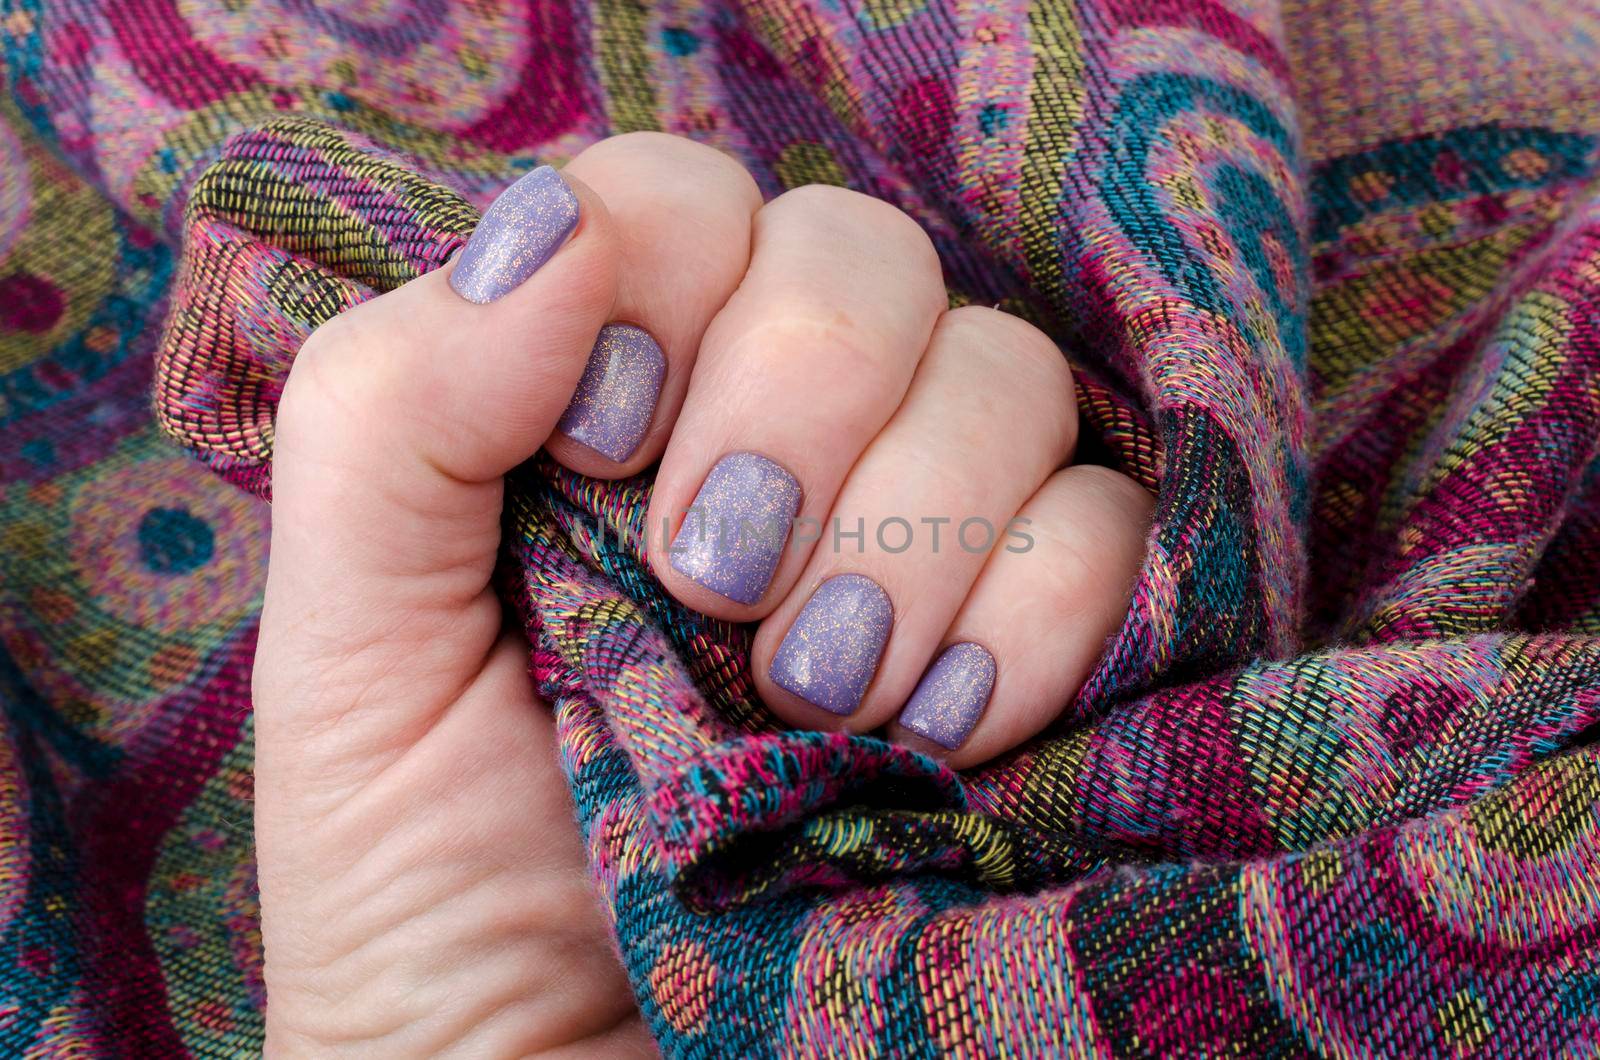 Hand of an adult woman with painted nails, manicure, nail polish by ArtCookStudio